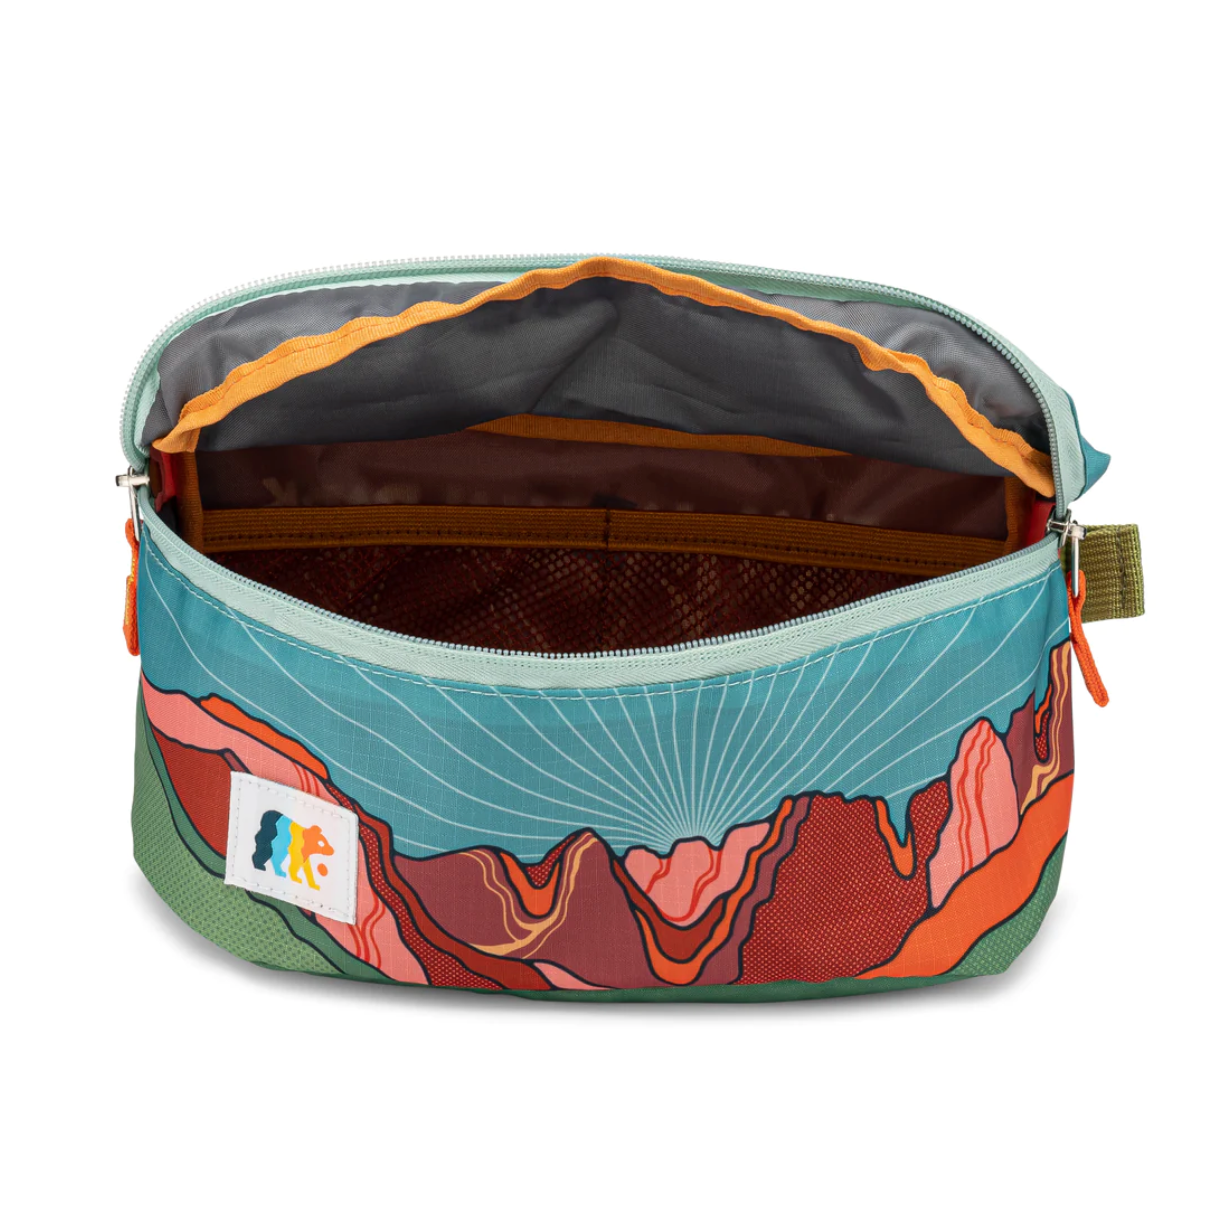 Zion National Park Fanny Pack/Hip Pack